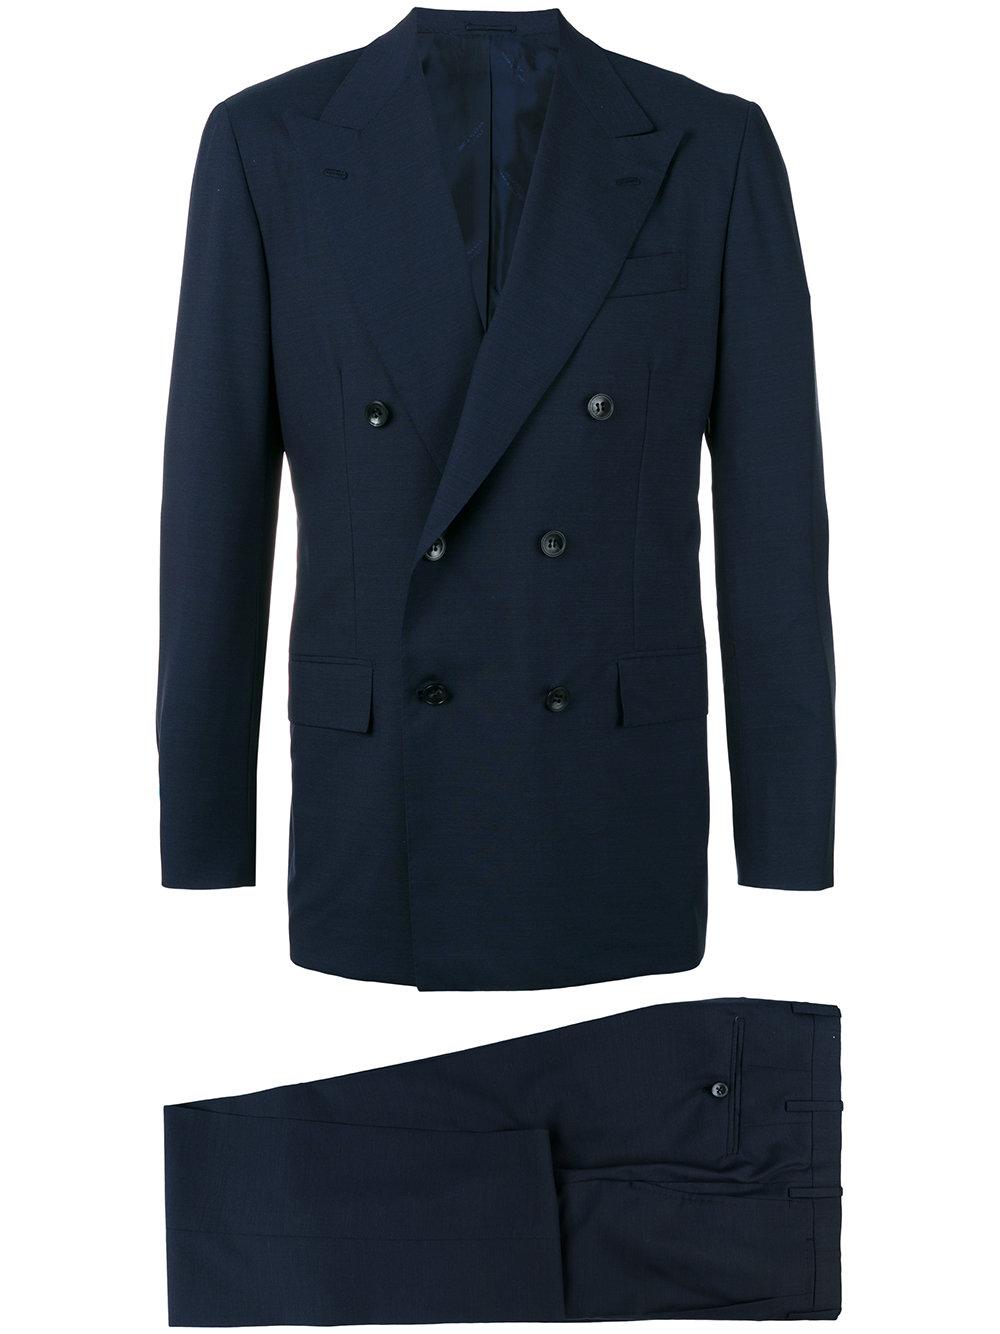 Lyst - Kiton Double-breasted Two-piece Suit in Blue for Men